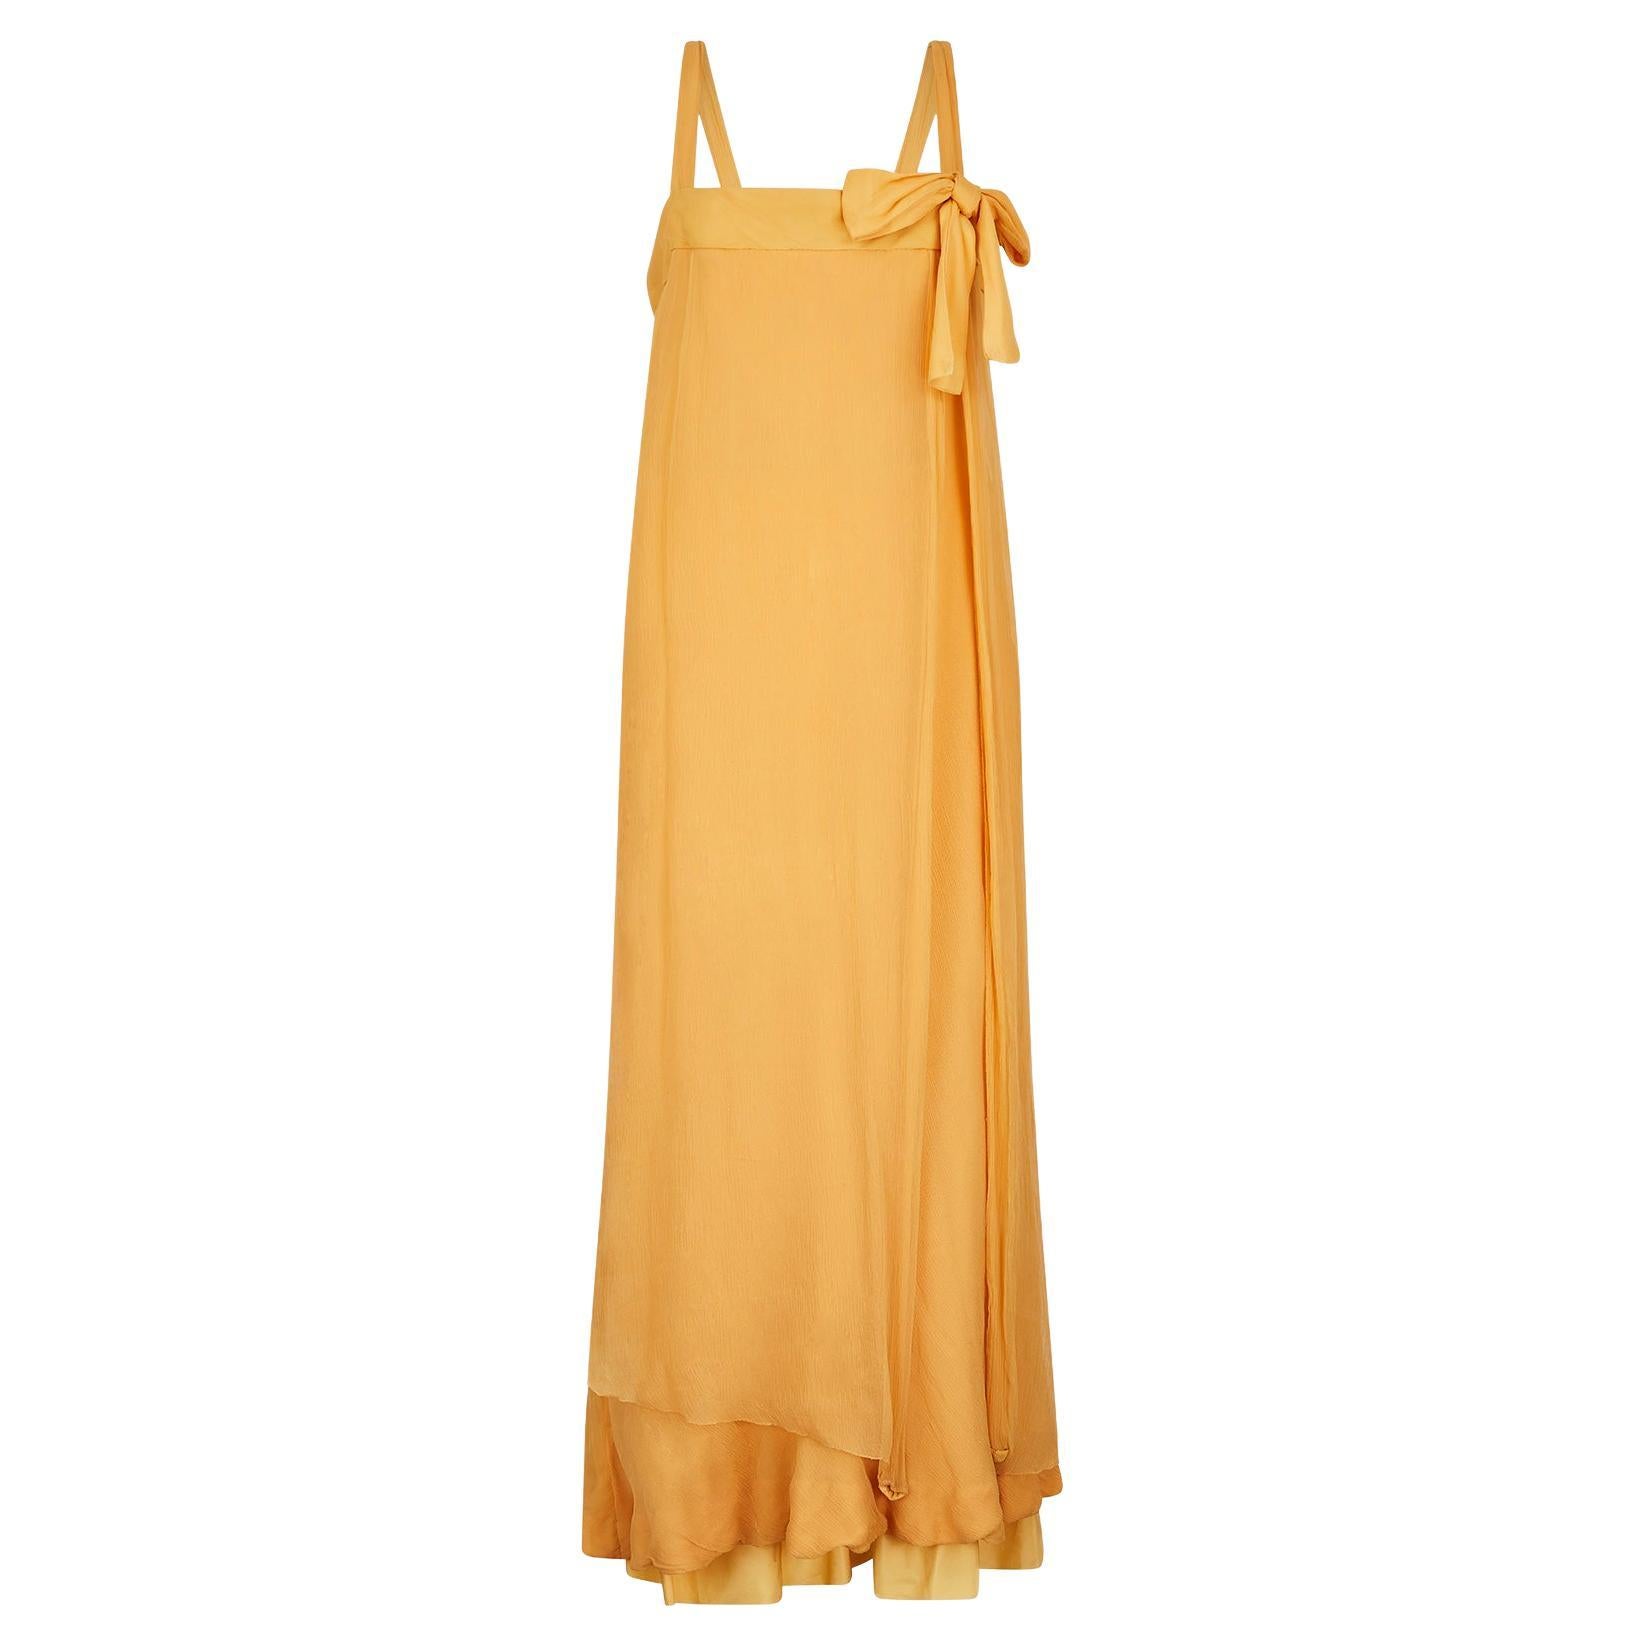 1950s Jacques Heim Haute Couture Yellow Chiffon Dress For Sale